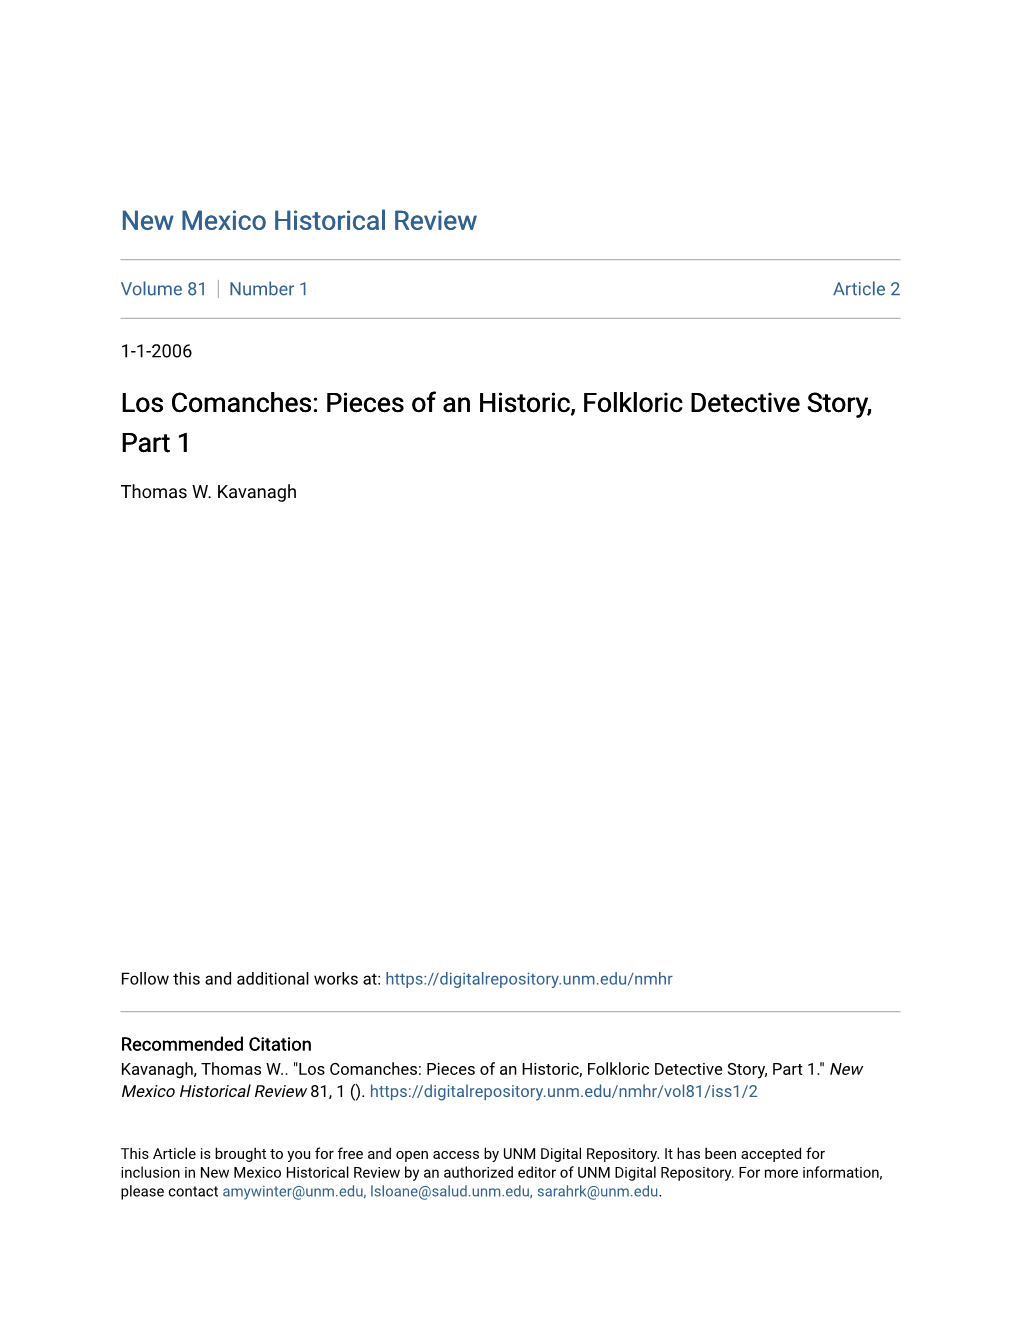 Los Comanches: Pieces of an Historic, Folkloric Detective Story, Part 1